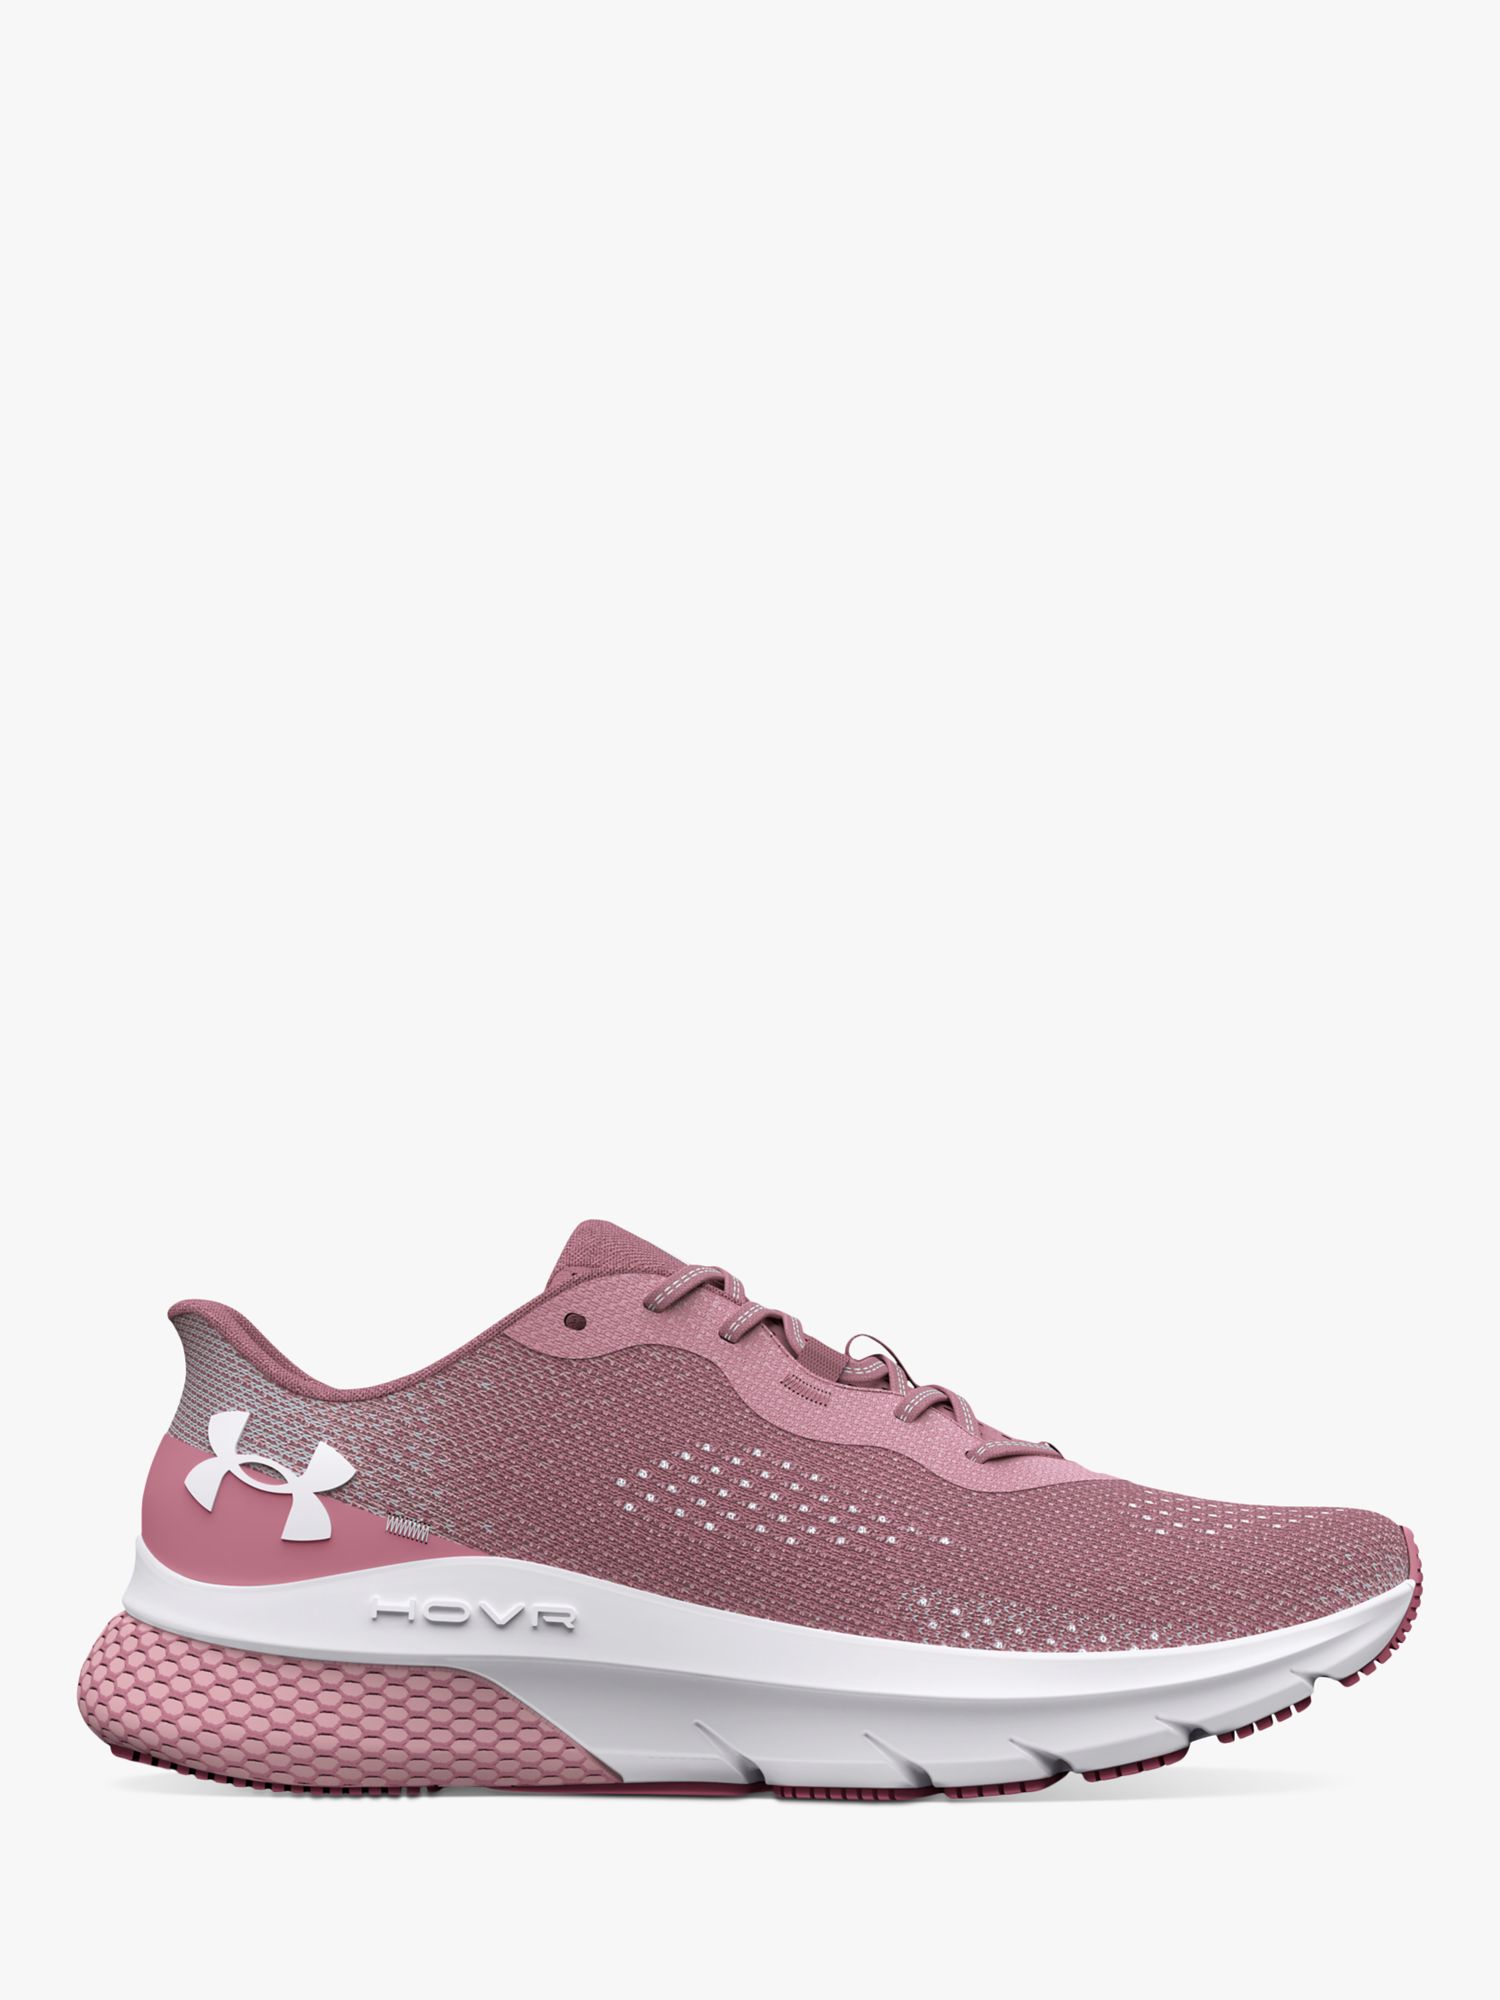 Under Armour HOVR Women's Sports Trainers, Black/White/Gray at John ...